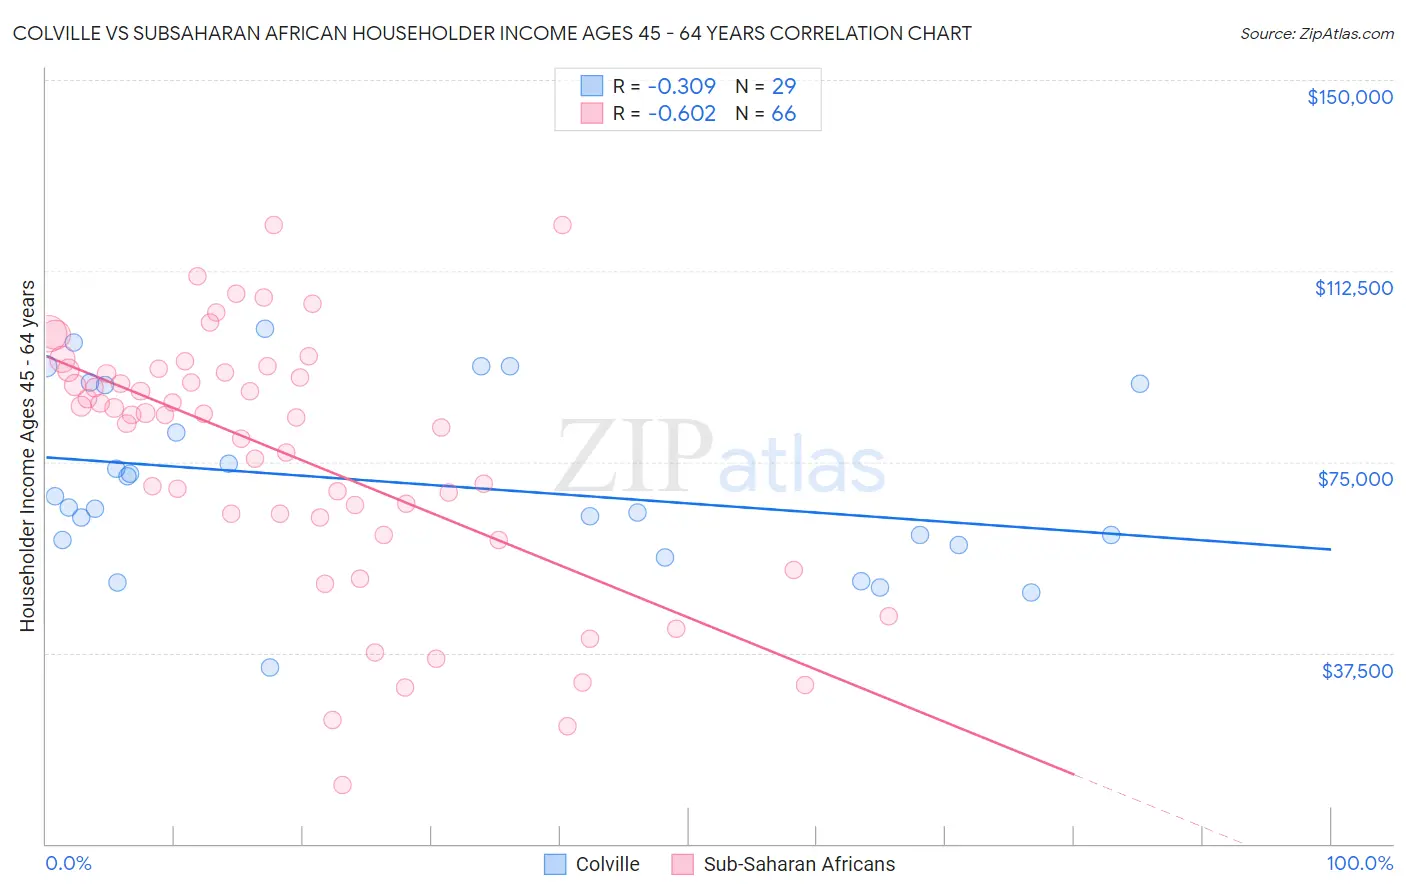 Colville vs Subsaharan African Householder Income Ages 45 - 64 years